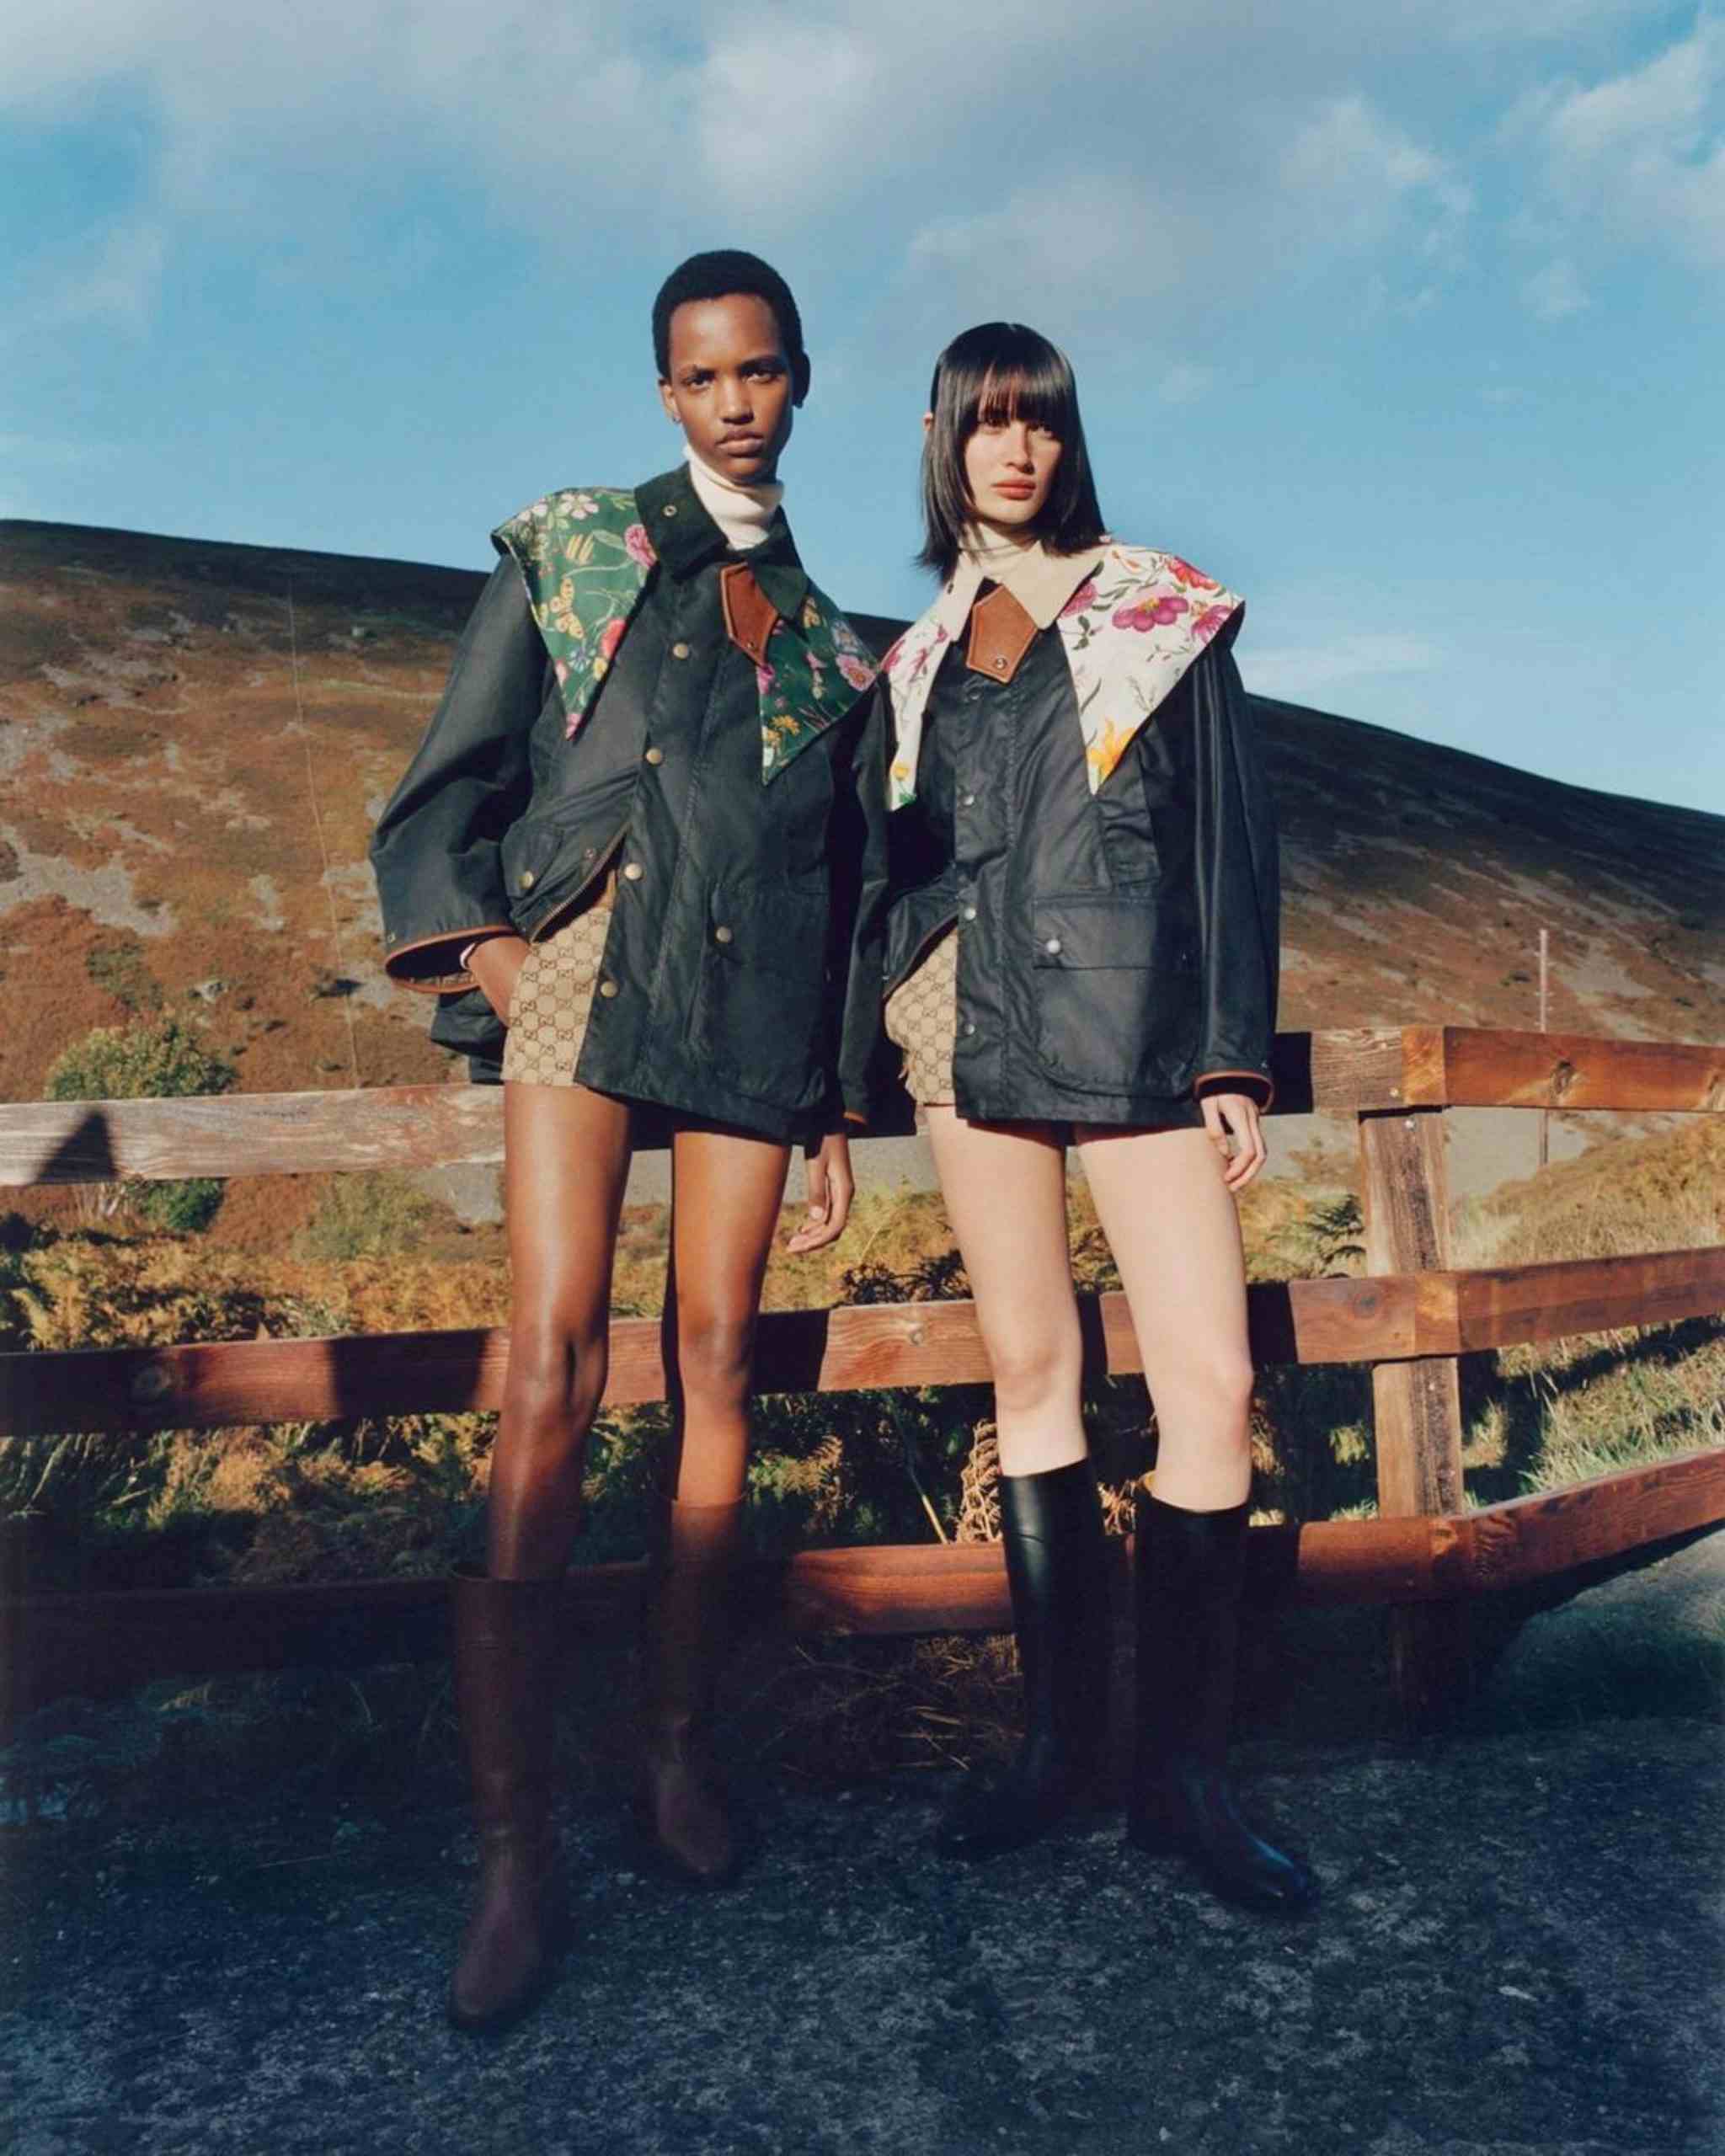 GUCCI - Barbour Re-Loved × Gucci Continuum Collection
Photographer: Osma Harvilahti
Stylist: Luca Galasso
Location: North England